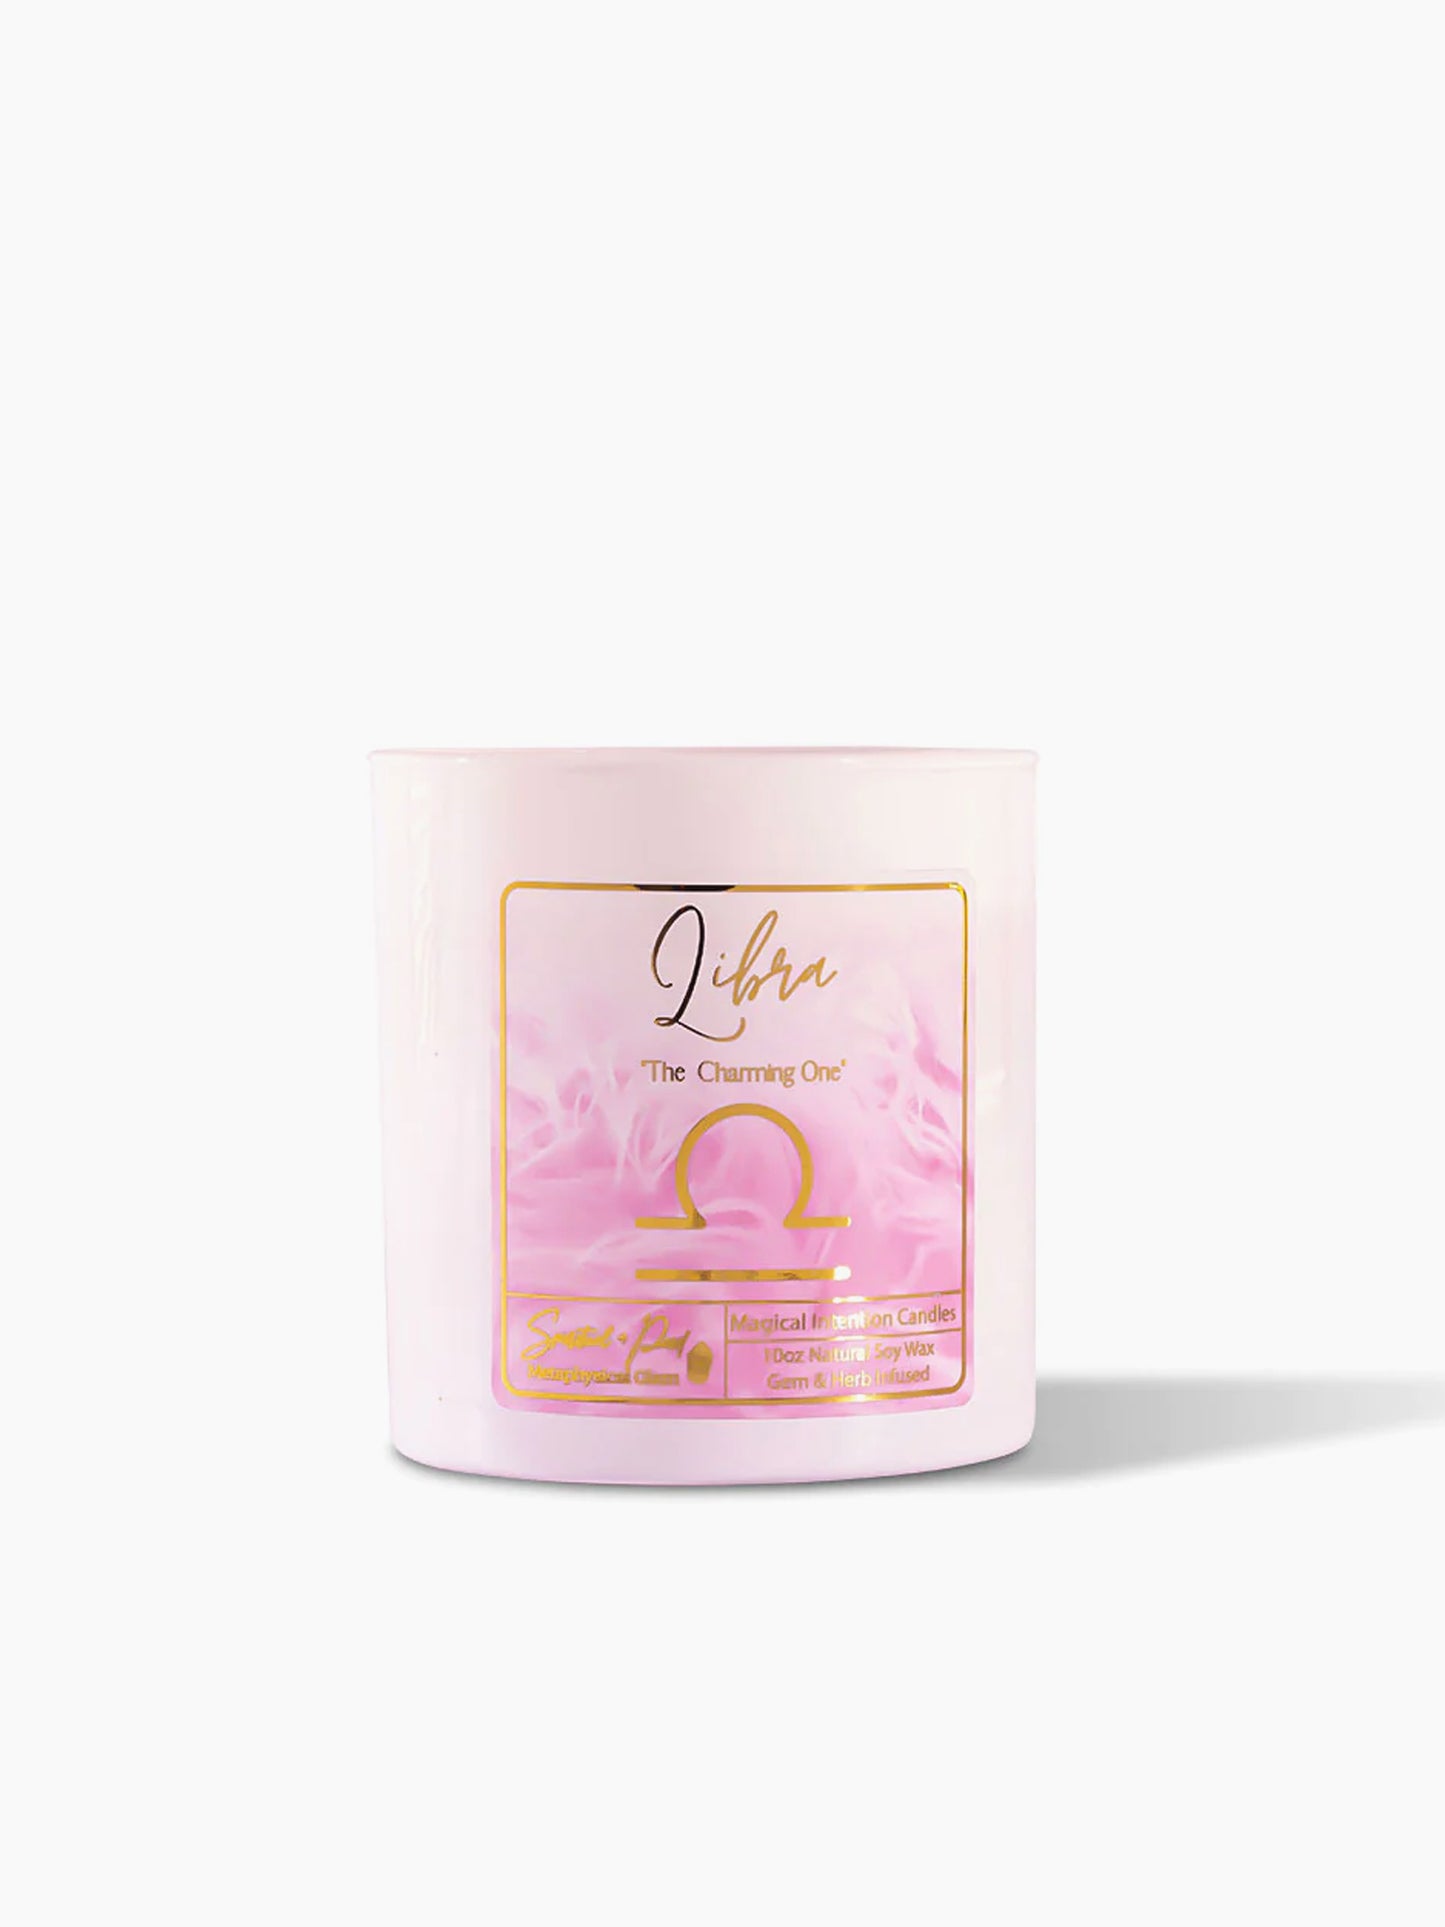 Zodiac Collection: Libra Energy Candle ~ The Charming One